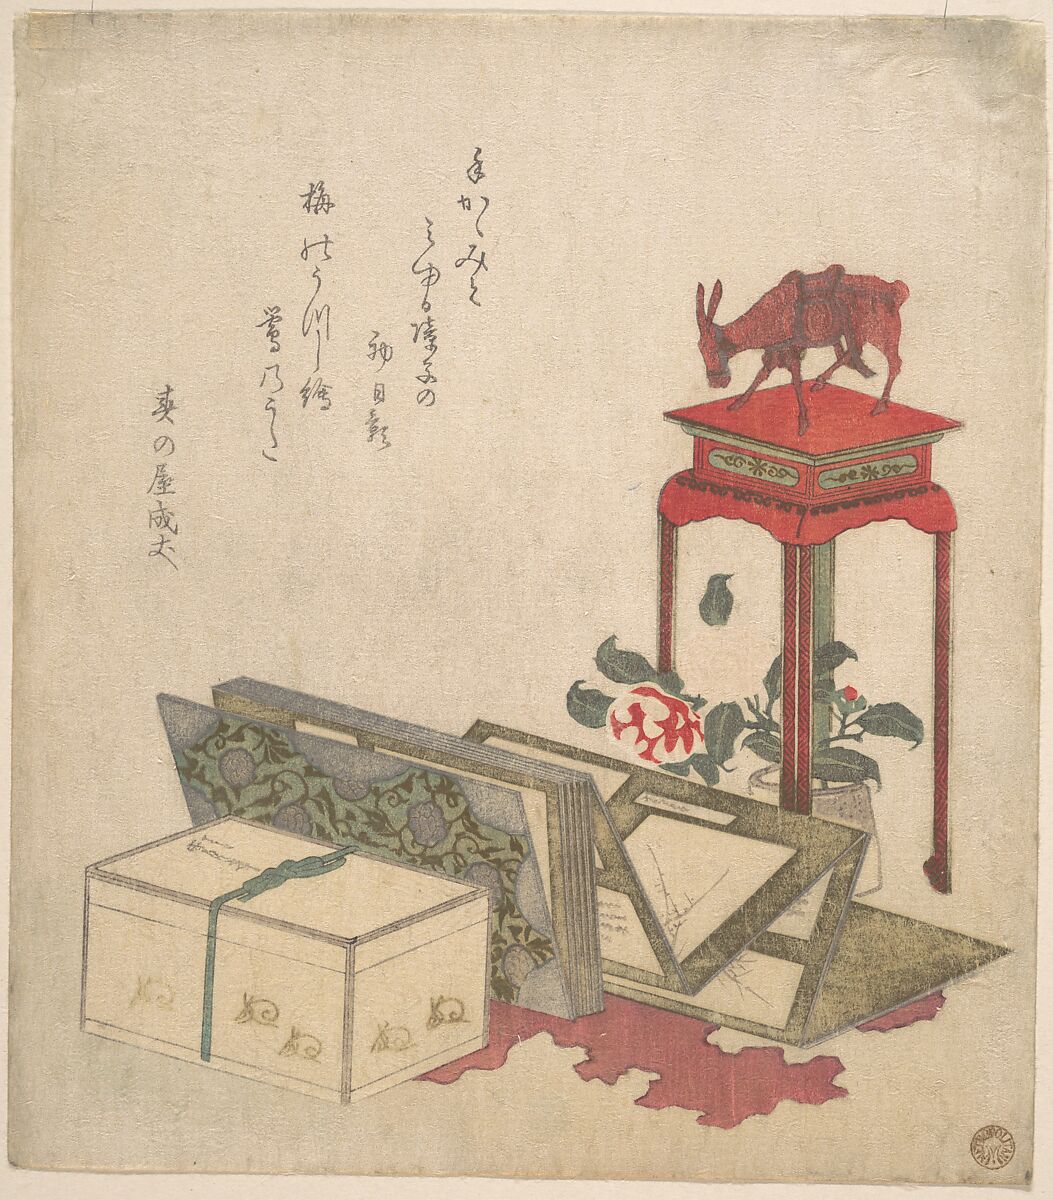 Still life, Unidentified artist, Woodblock print (surimono); ink and color on paper, Japan 